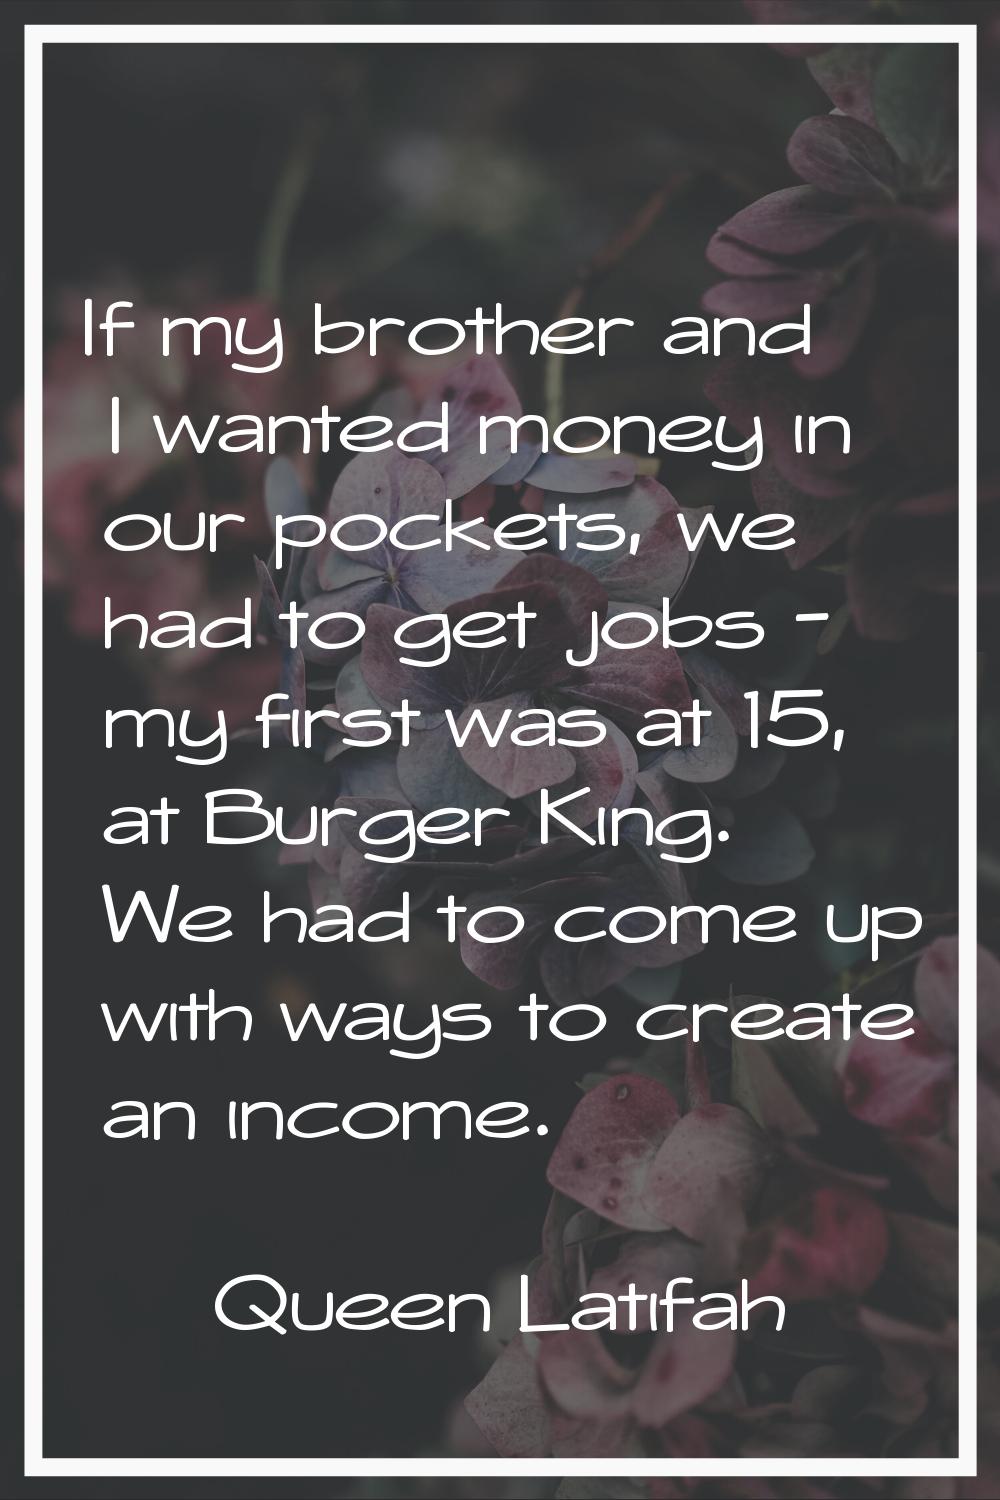 If my brother and I wanted money in our pockets, we had to get jobs - my first was at 15, at Burger